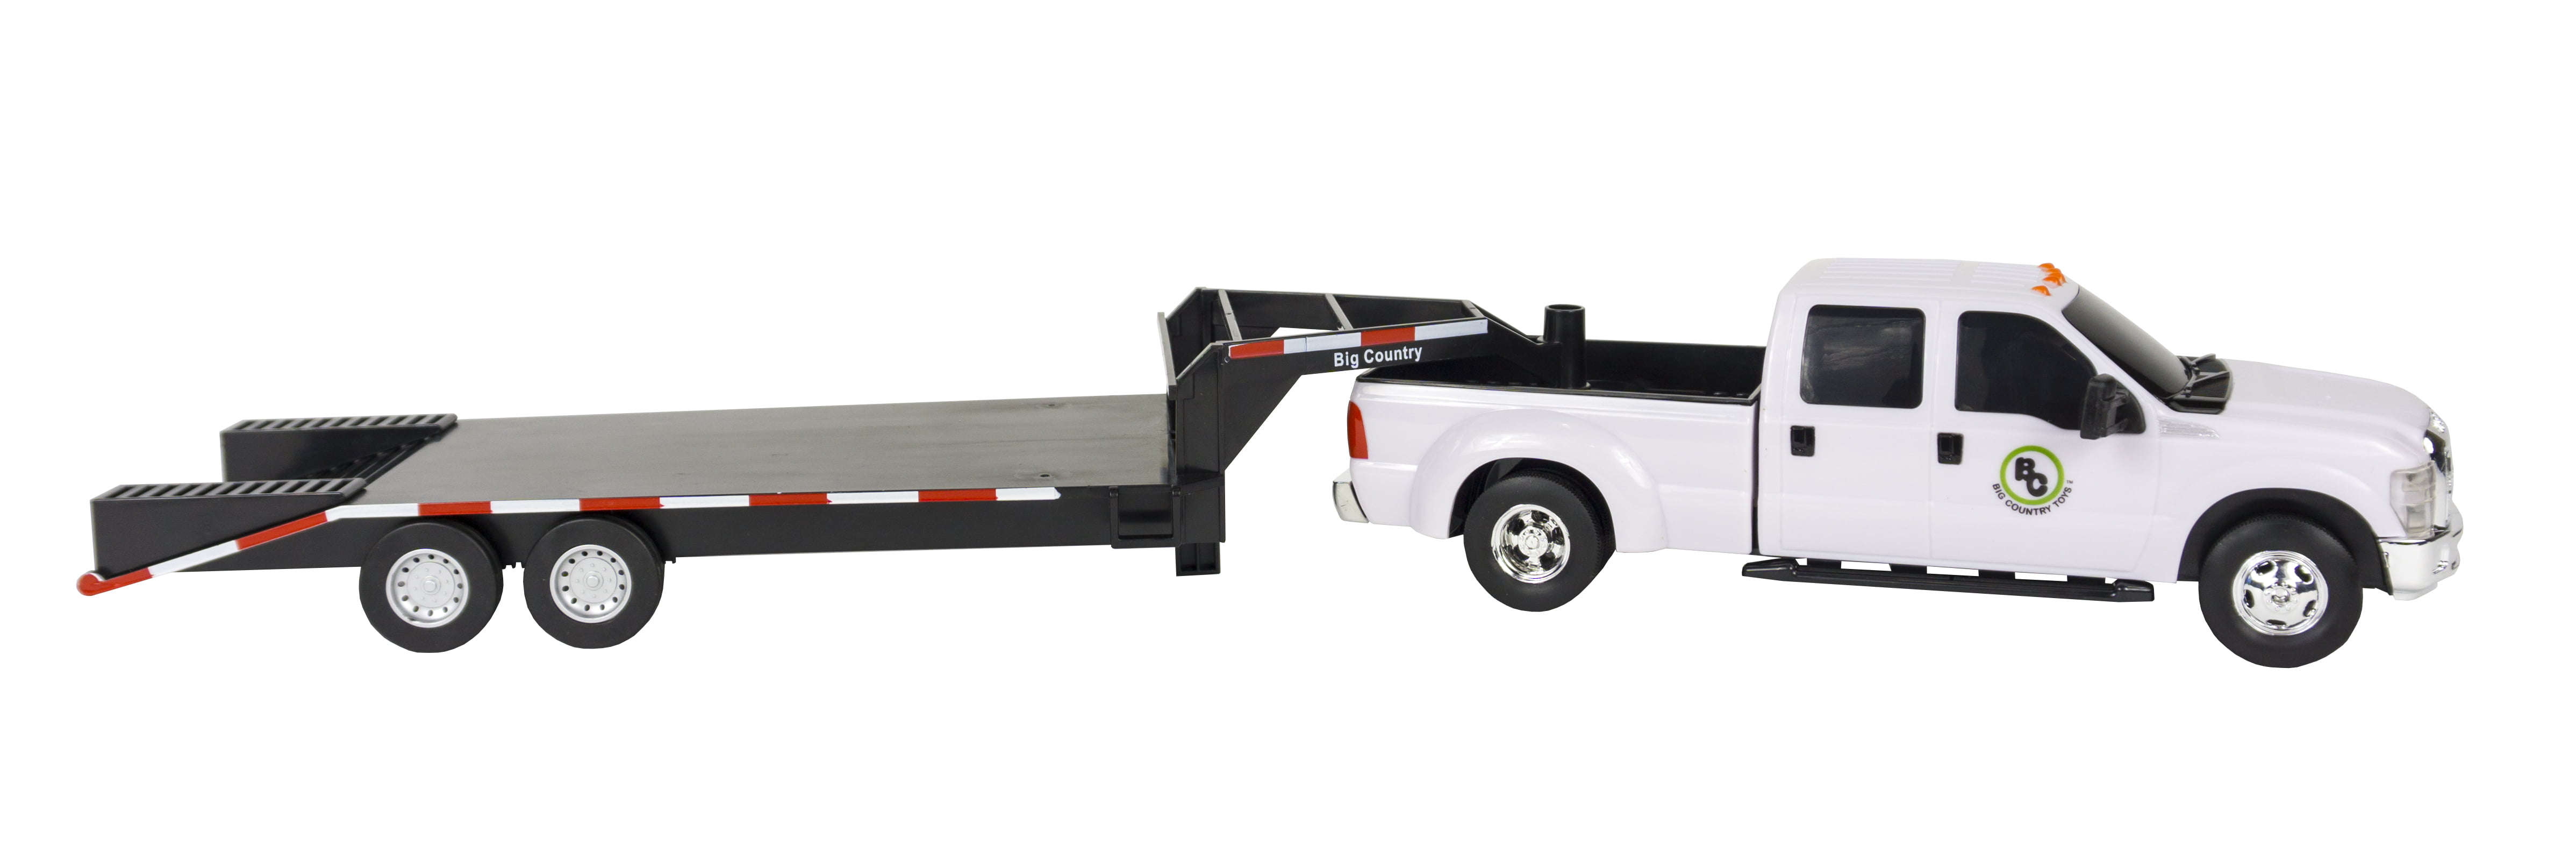 2022-06-19. iphone X. Big Country Farm Toys Flatbed Trailer toy truck with ...